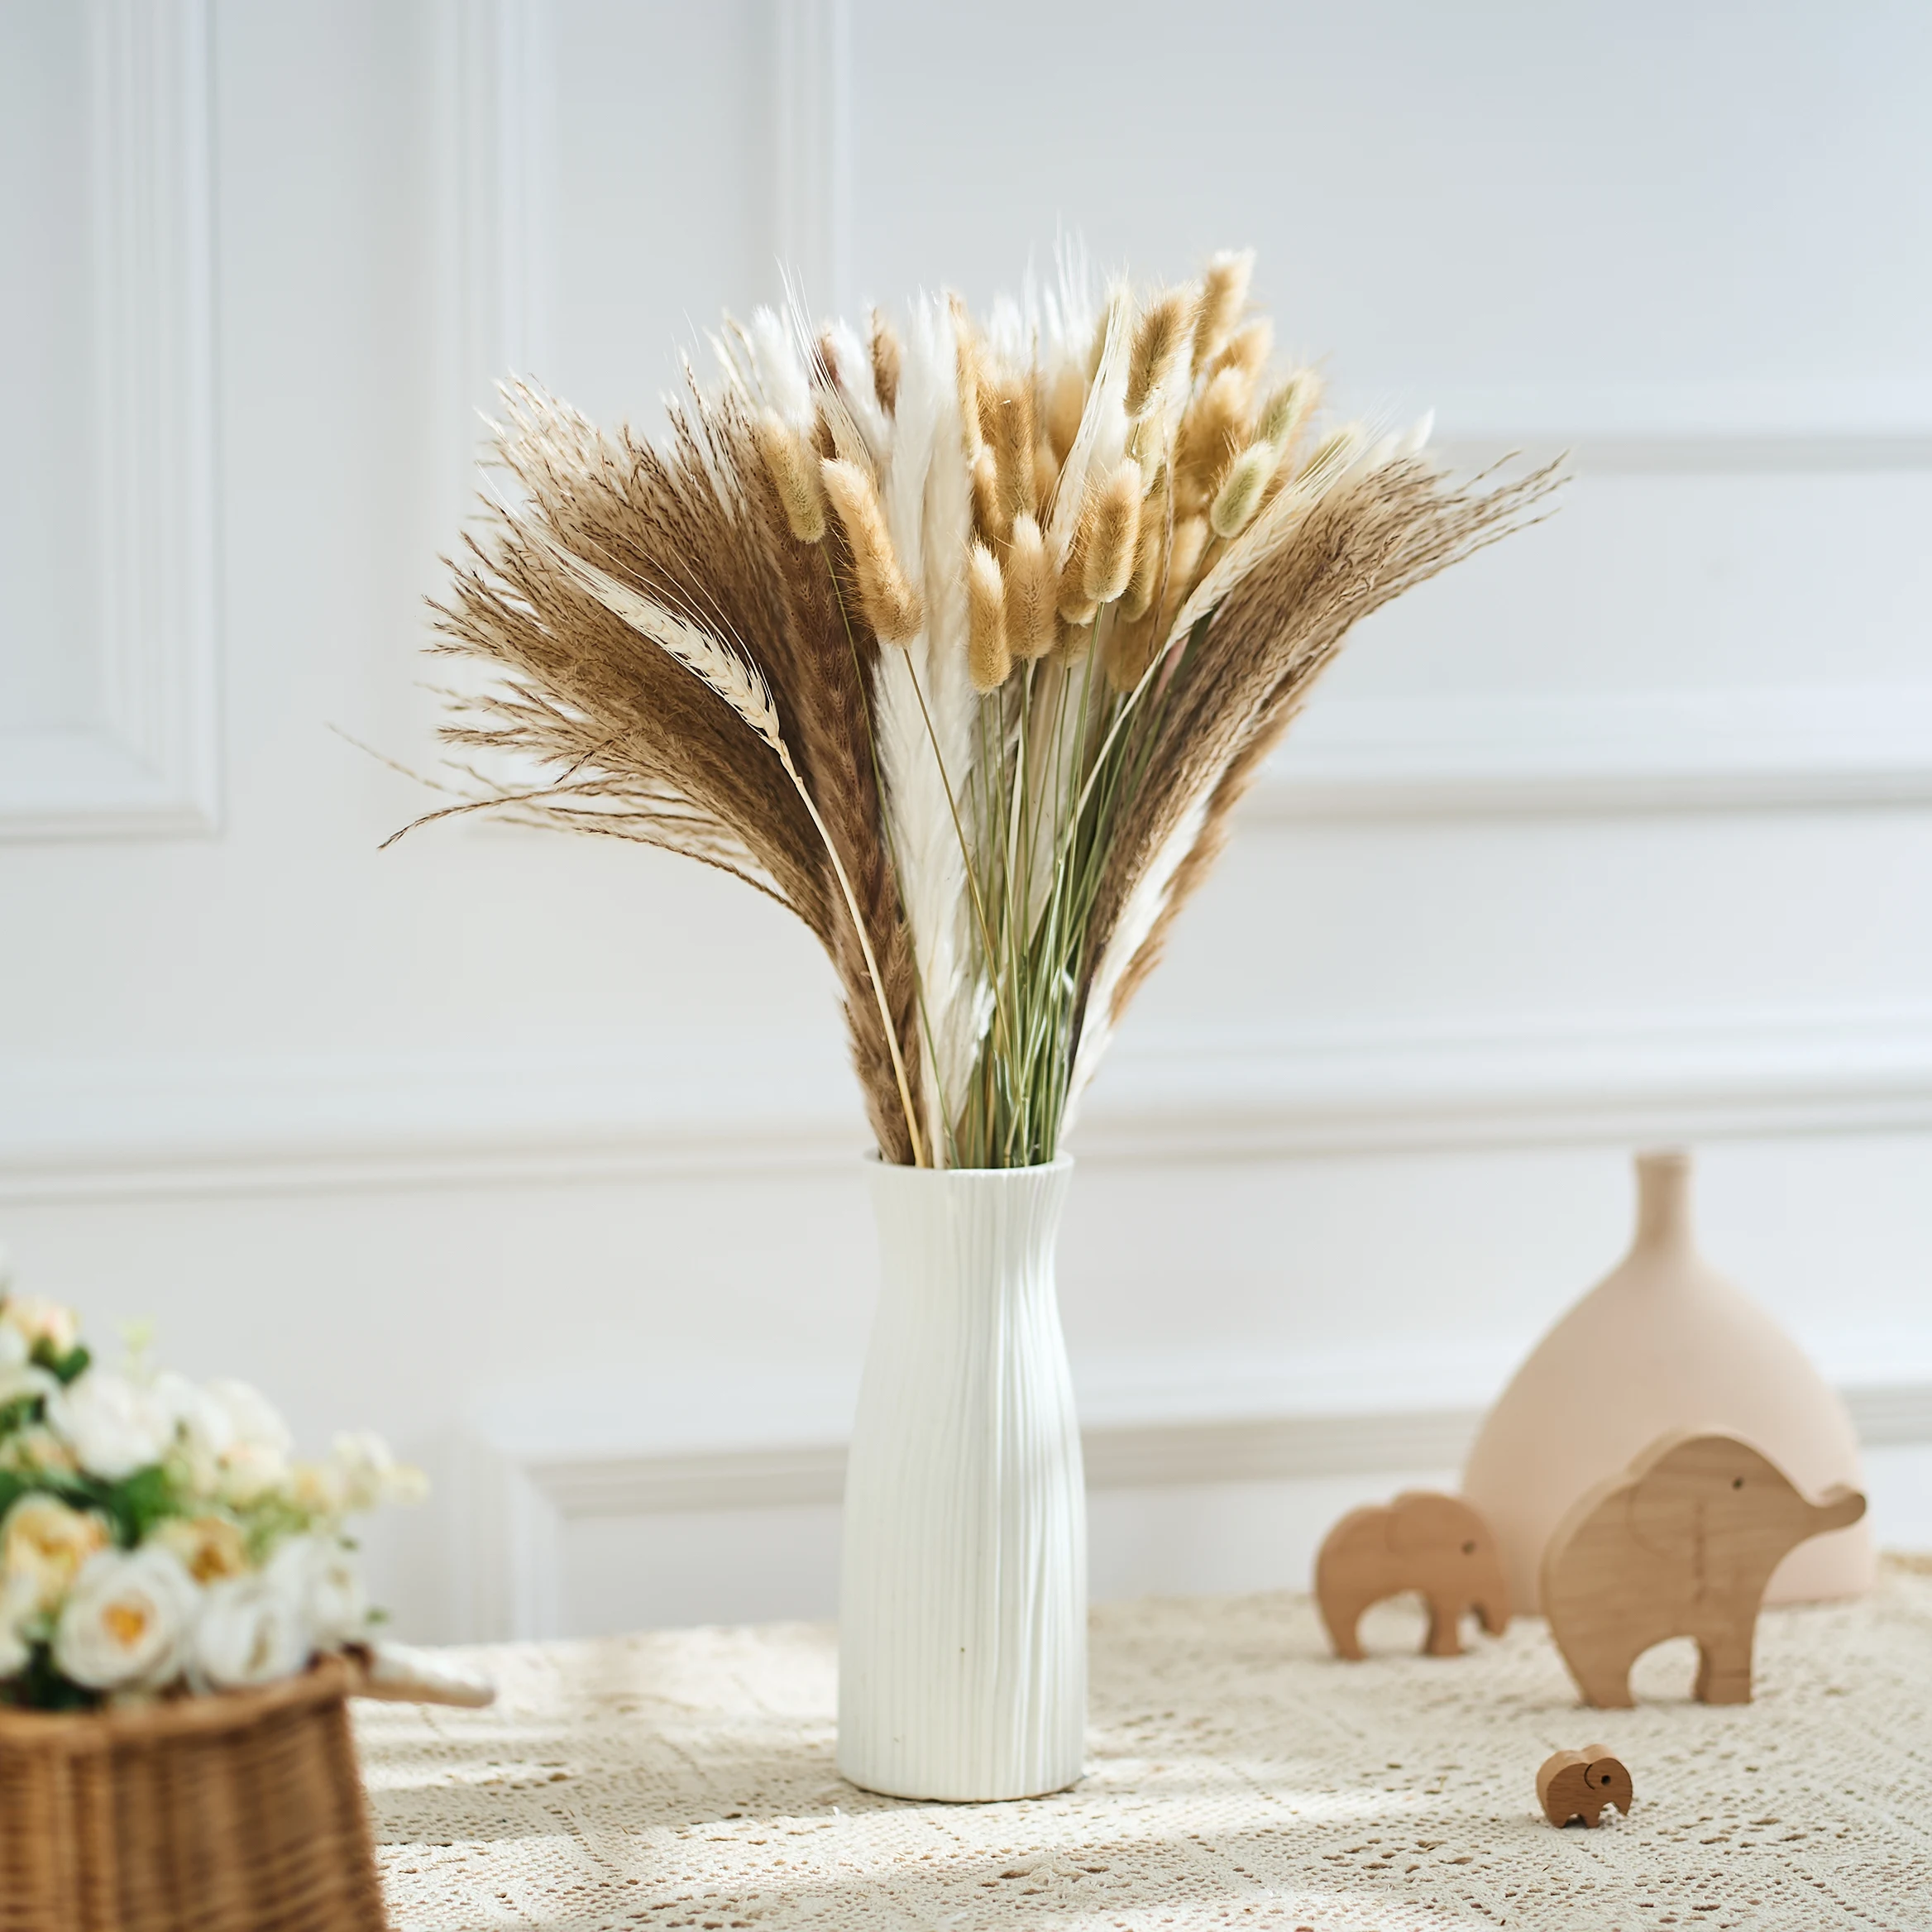 

100pcs Natural Pampa Rabbit Tail Grass Dried Flowers Bouquet Wedding Home Christmas Decoration Bunny Tail Plants Boho Style Deco